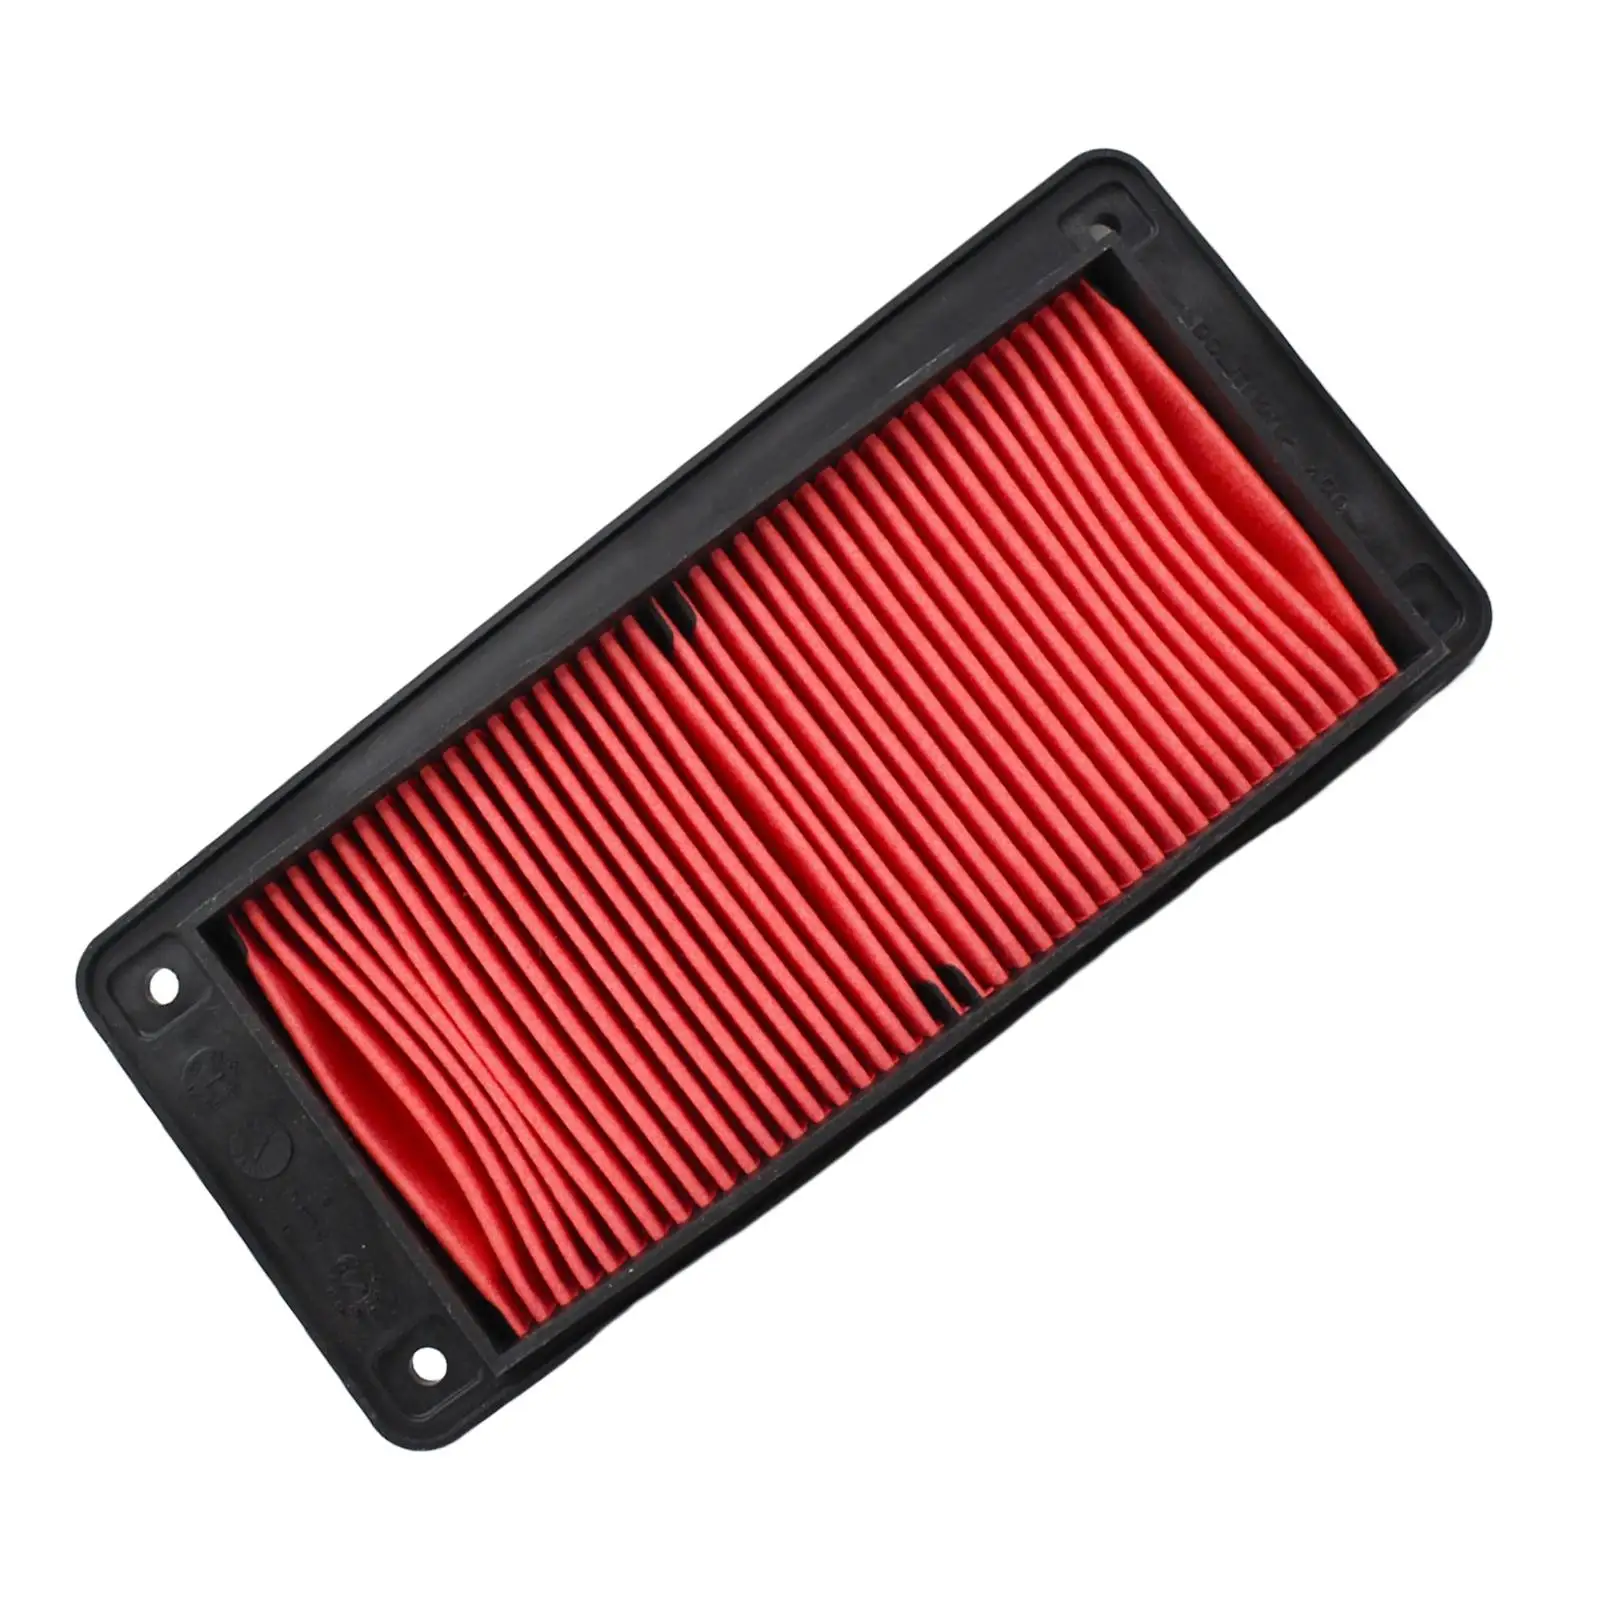  Air Filter Replaces Install Accessory Washable Engine Reusable